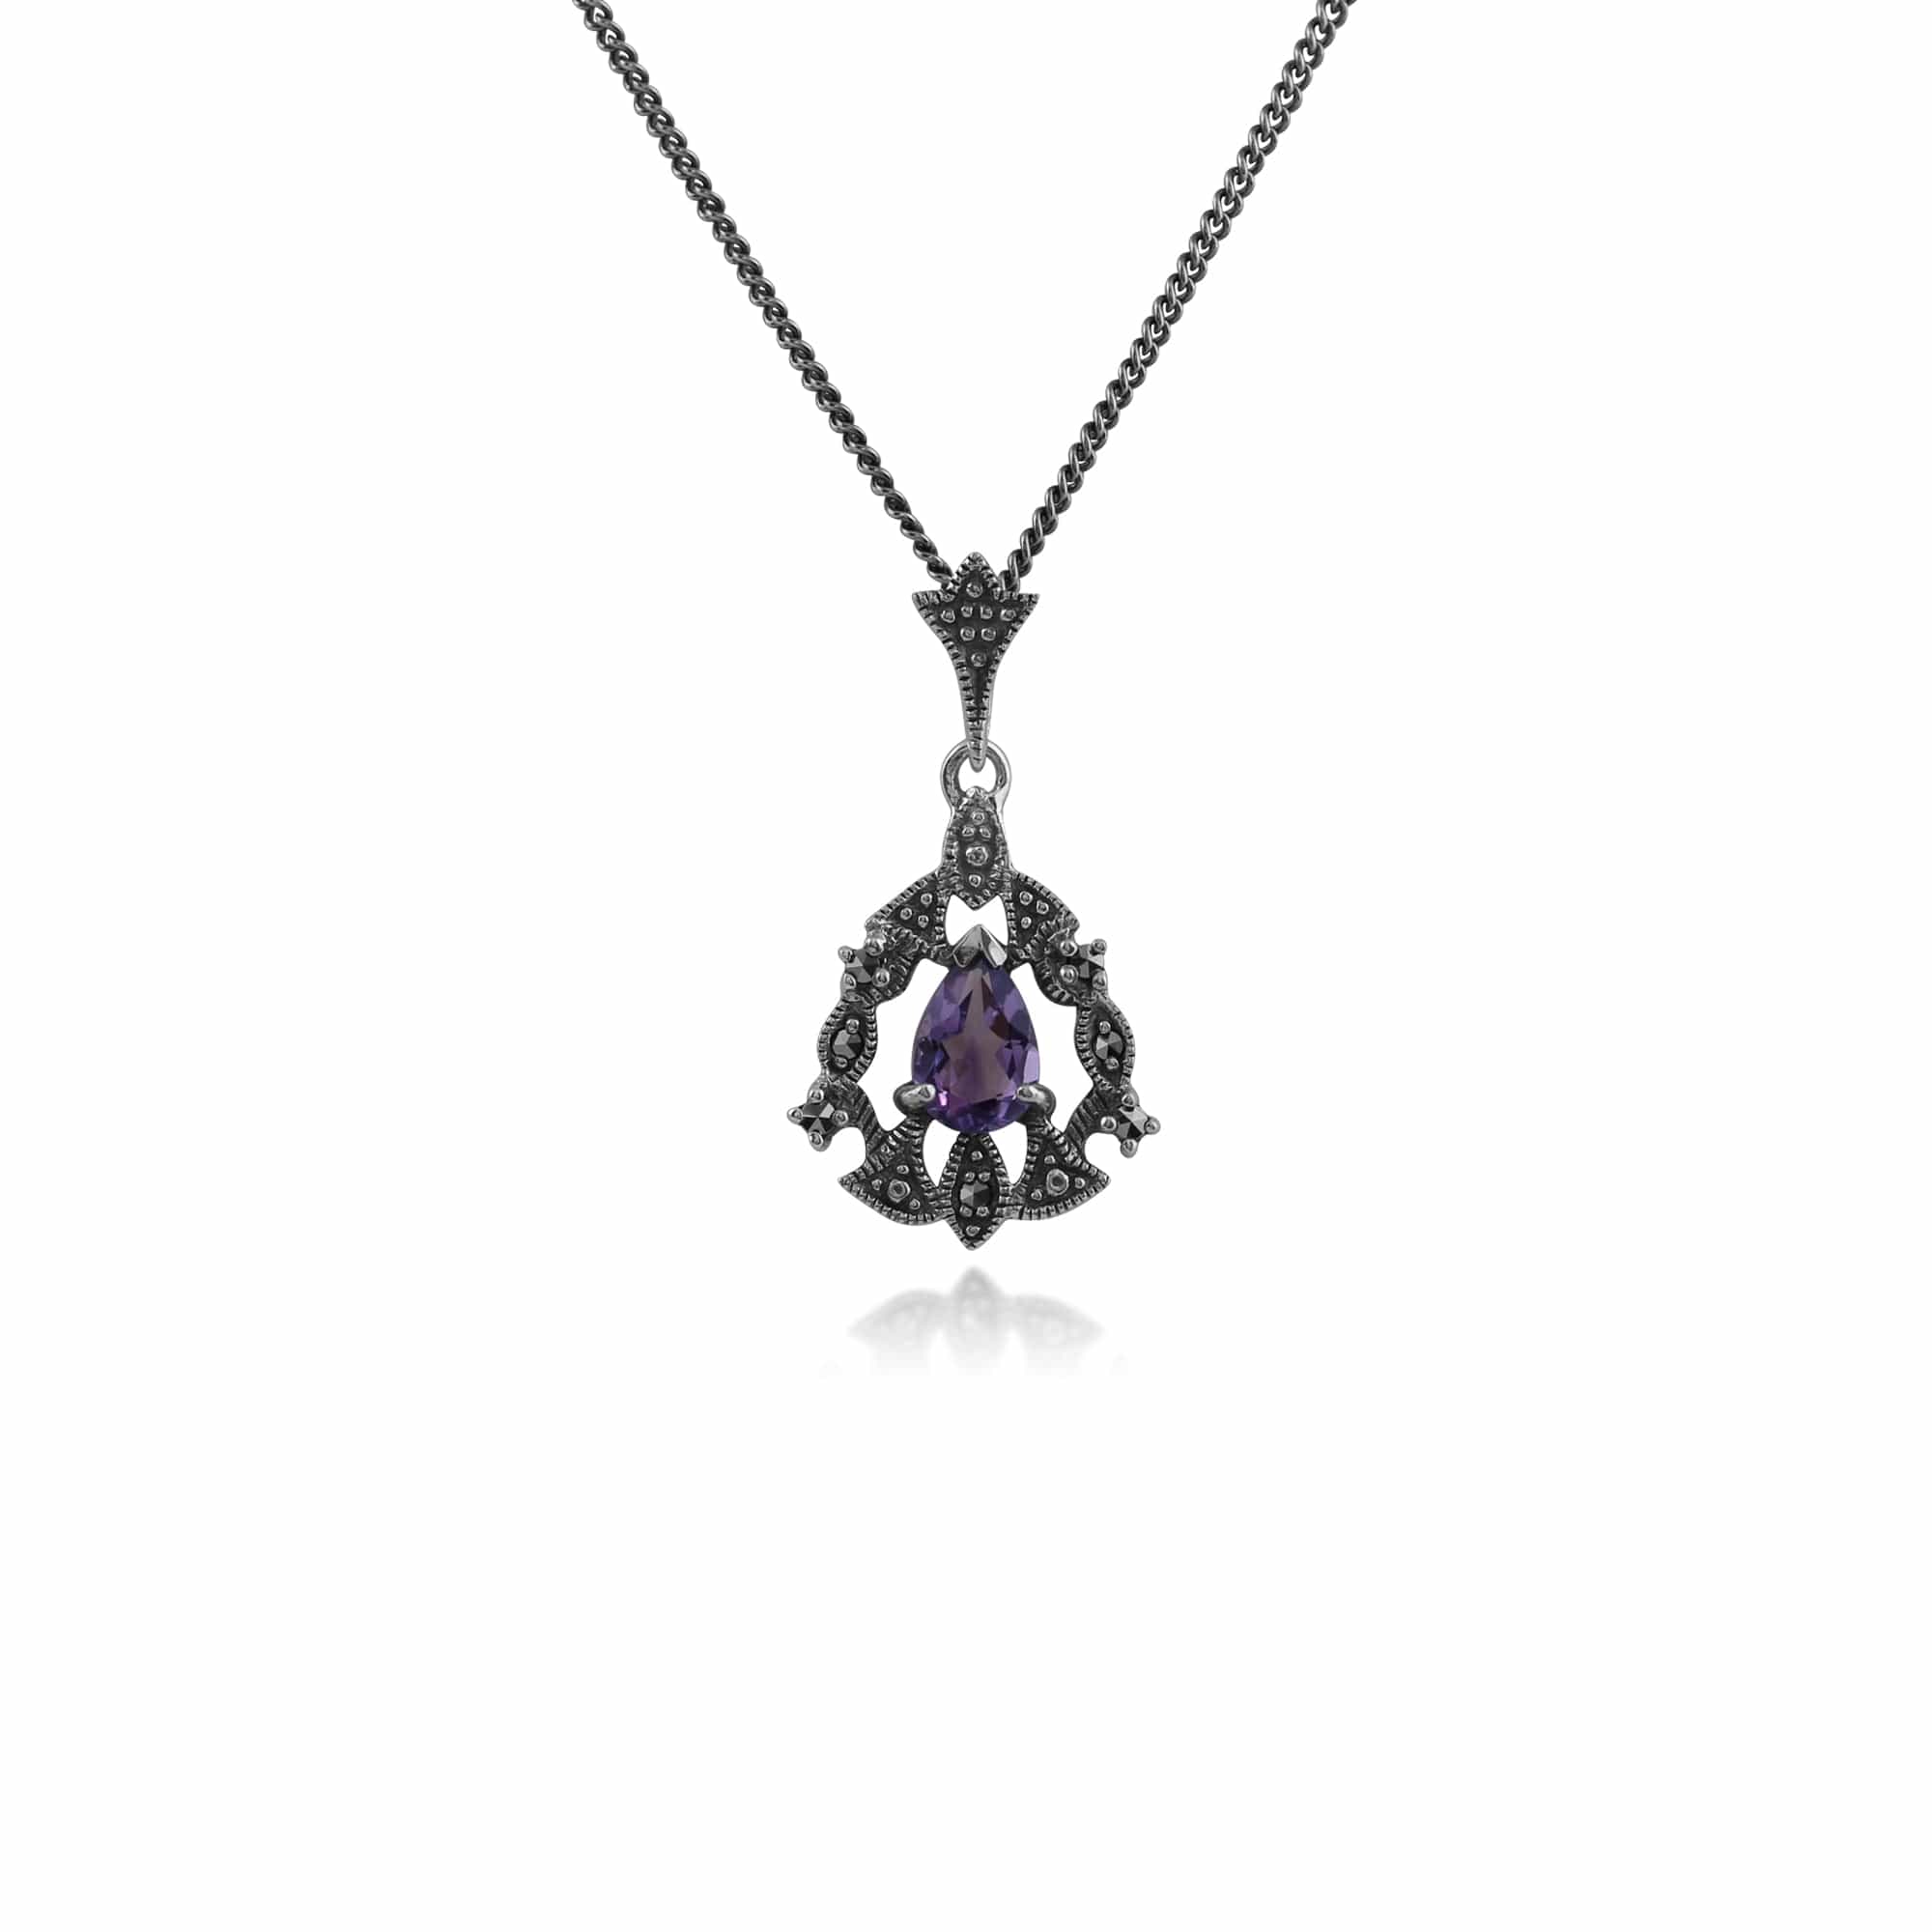 214N540202925-214R507802925 Art Nouveau Style Pear Amethyst & Marcasite Garland Pendant & Ring Set in 925 Sterling Silver 2